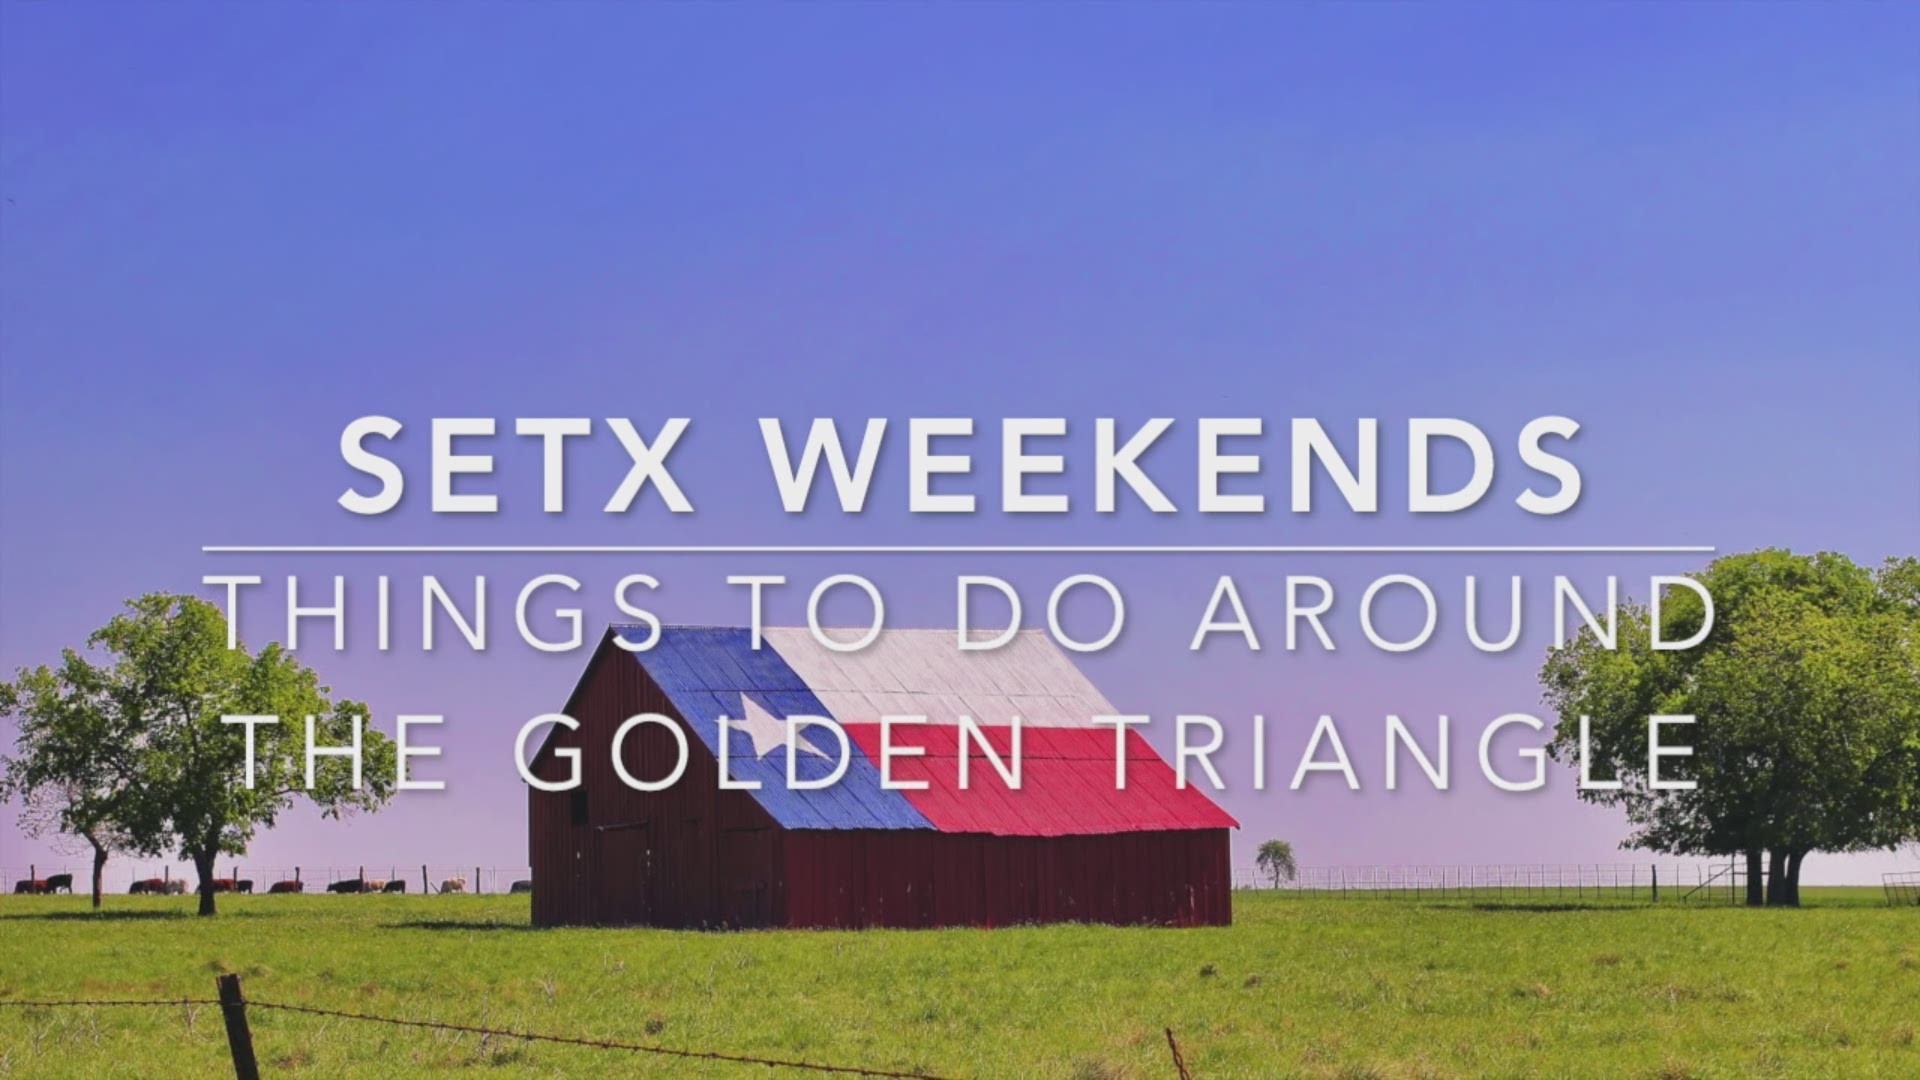 Things to do around the Golden Triangle this weekend